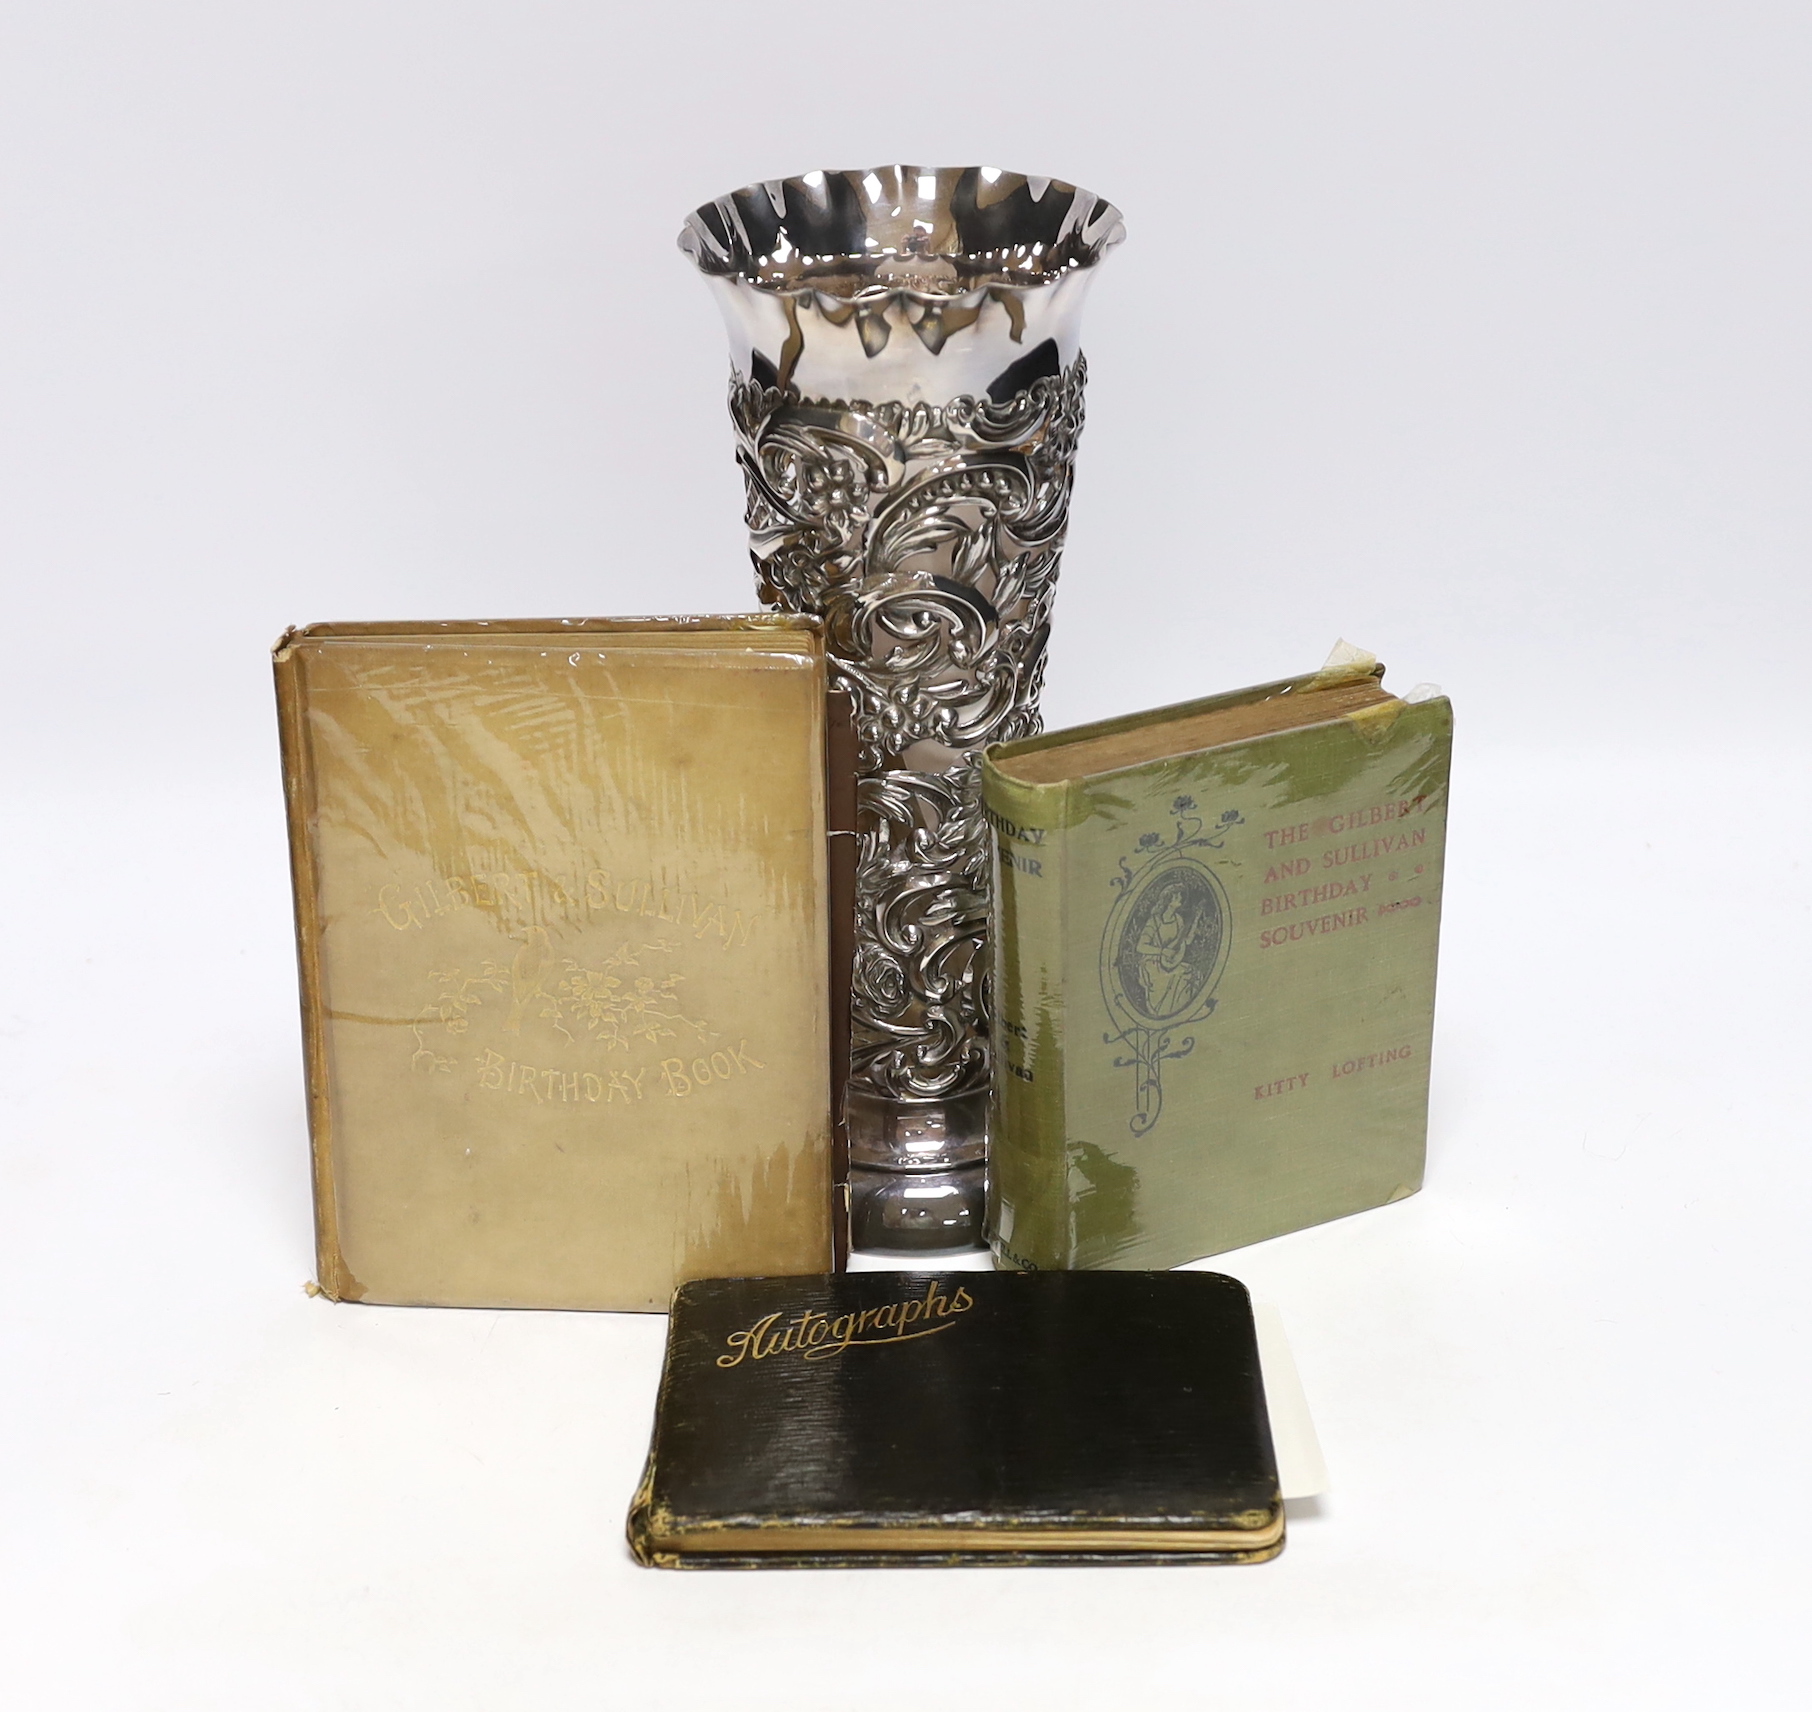 D’Oyly Carte and Gilbert & Sullivan interest; A silver vase by William Comyns with etched dedication; ‘Alice, from Arthur Sullivan 9 June 1892’, hallmarked London 1891, together with a 1920s autograph book of D’Oyly Cart